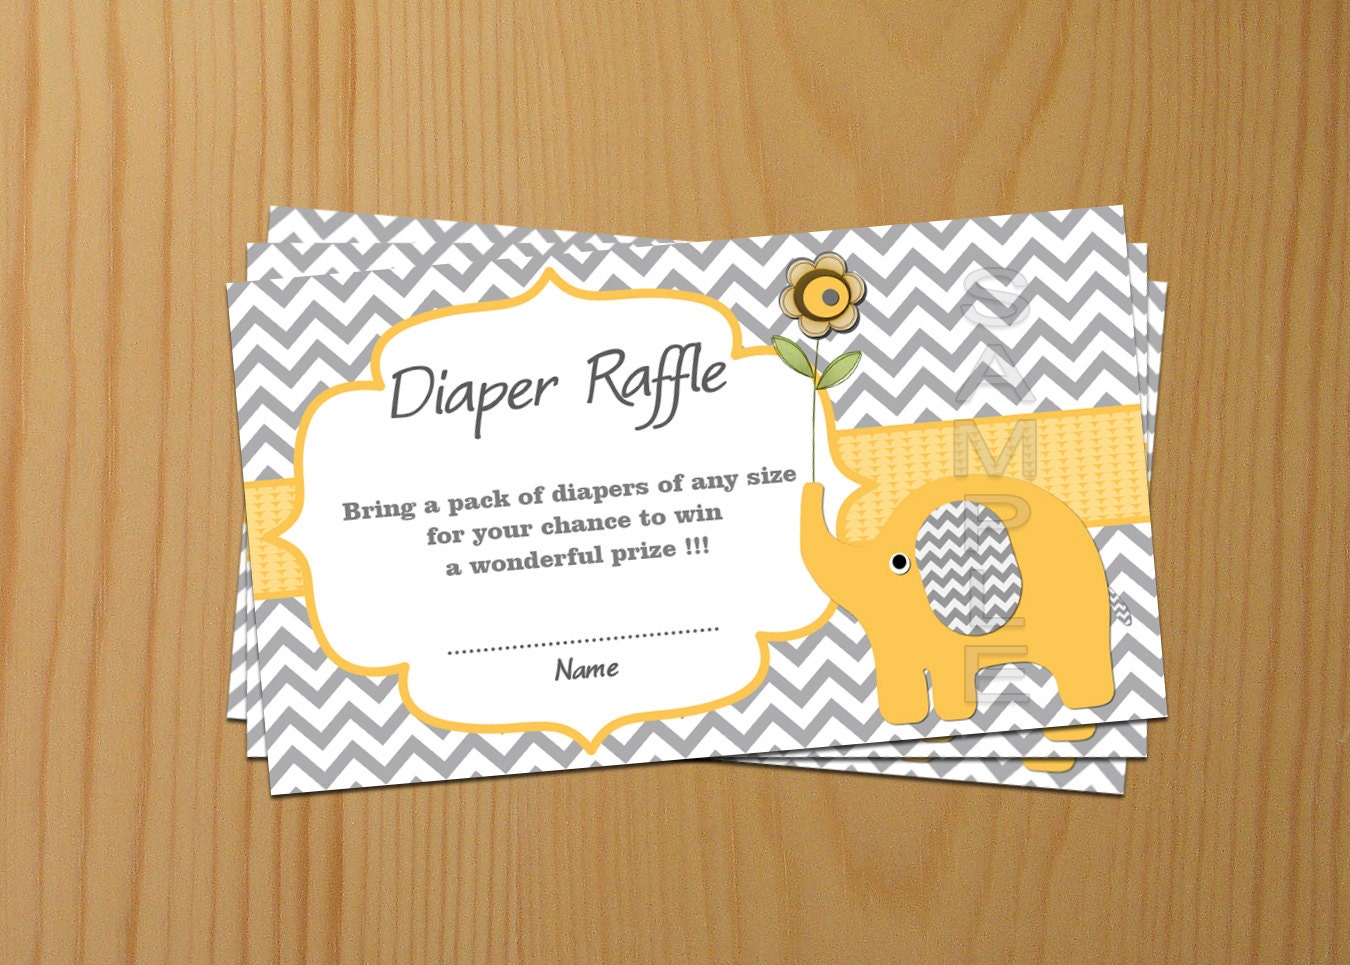 Baby Shower Invitations With Diaper Raffle 2